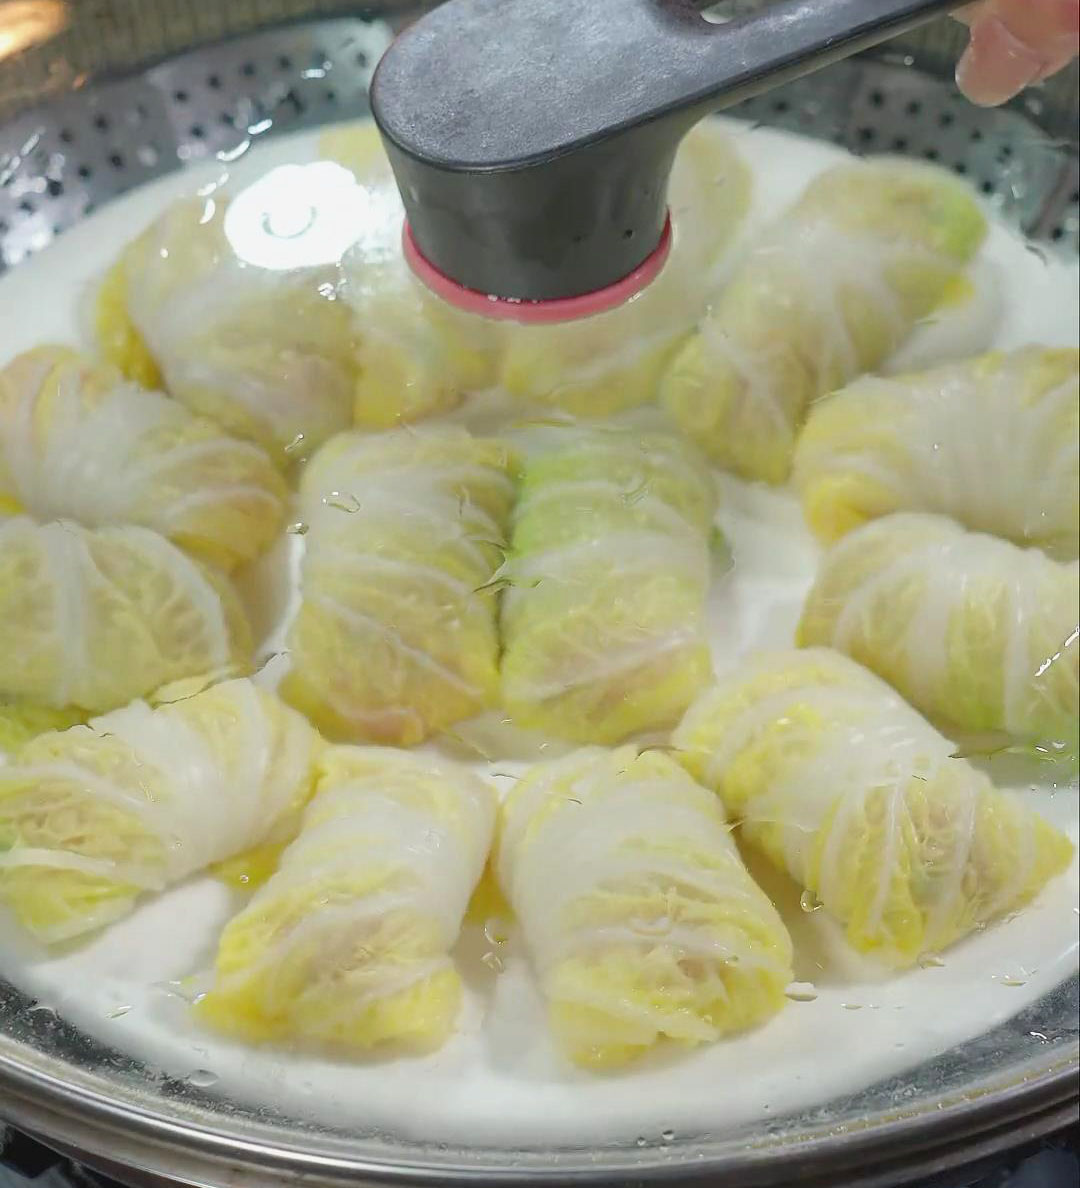 Steam cabbage rolls in a steamer for 8 minutes